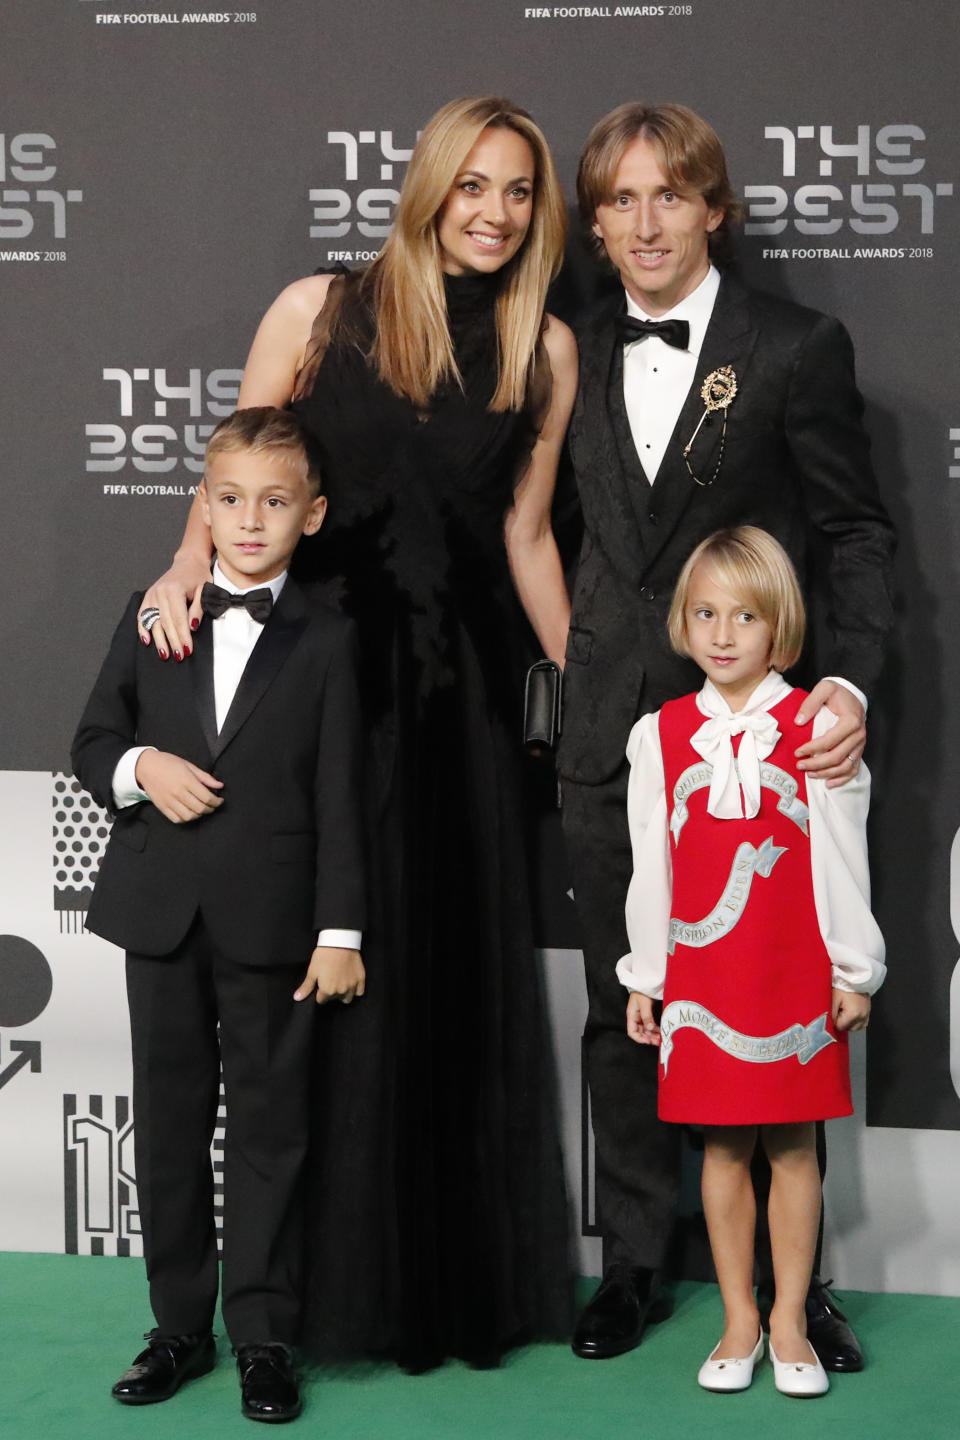 Croatia's soccer star Luka Modric, nominee for the Best FIFA Men's Player award, and his wife Vanja Bosnic, his son Ivano and his daughter Ema, arrive for the ceremony of the Best FIFA Football Awards in the Royal Festival Hall in London, Britain, Monday, Sept. 24, 2018. (AP Photo/Frank Augstein)